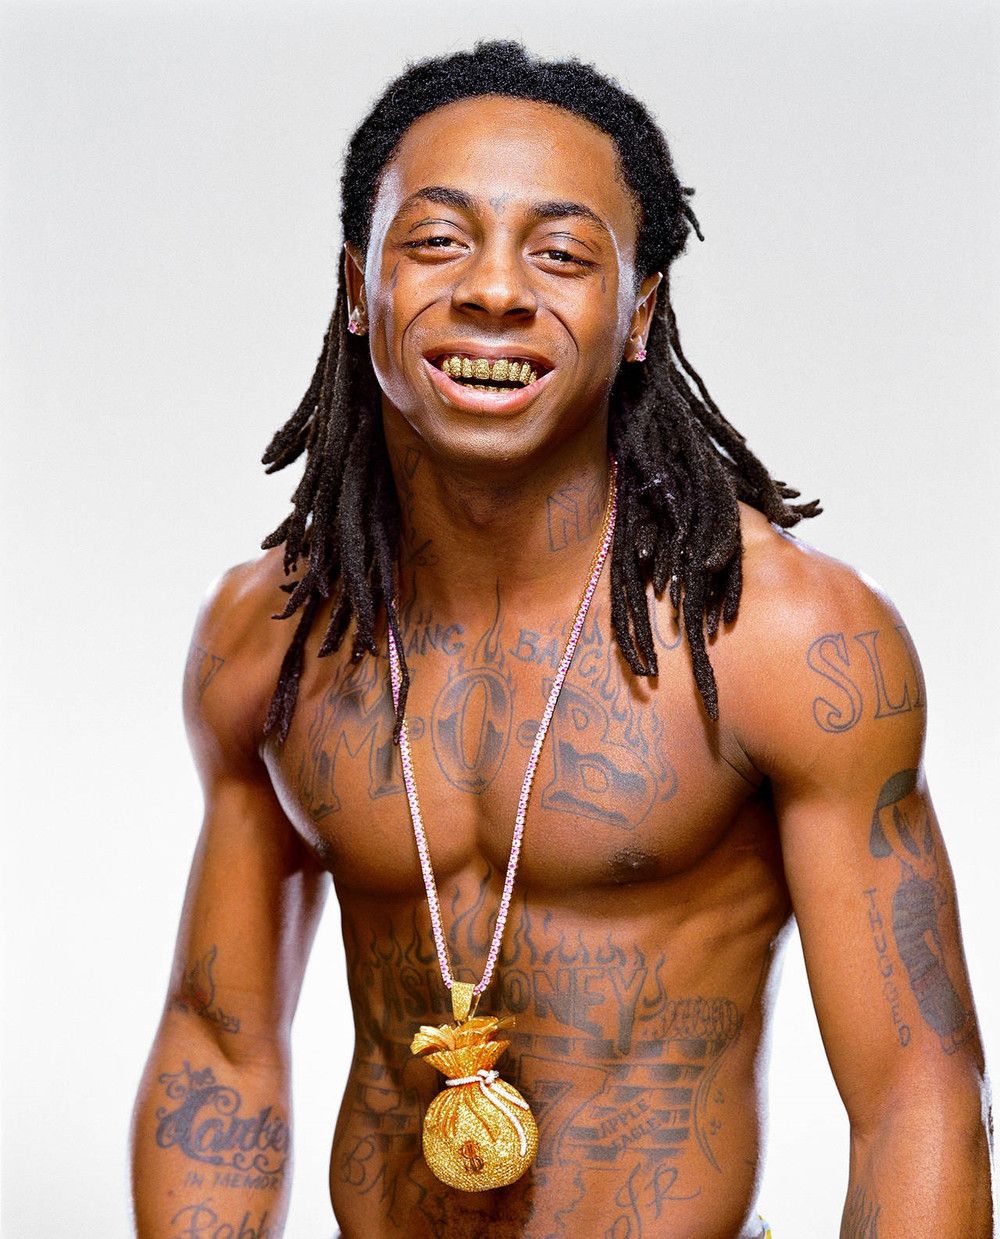 Picture of Lil Wayne